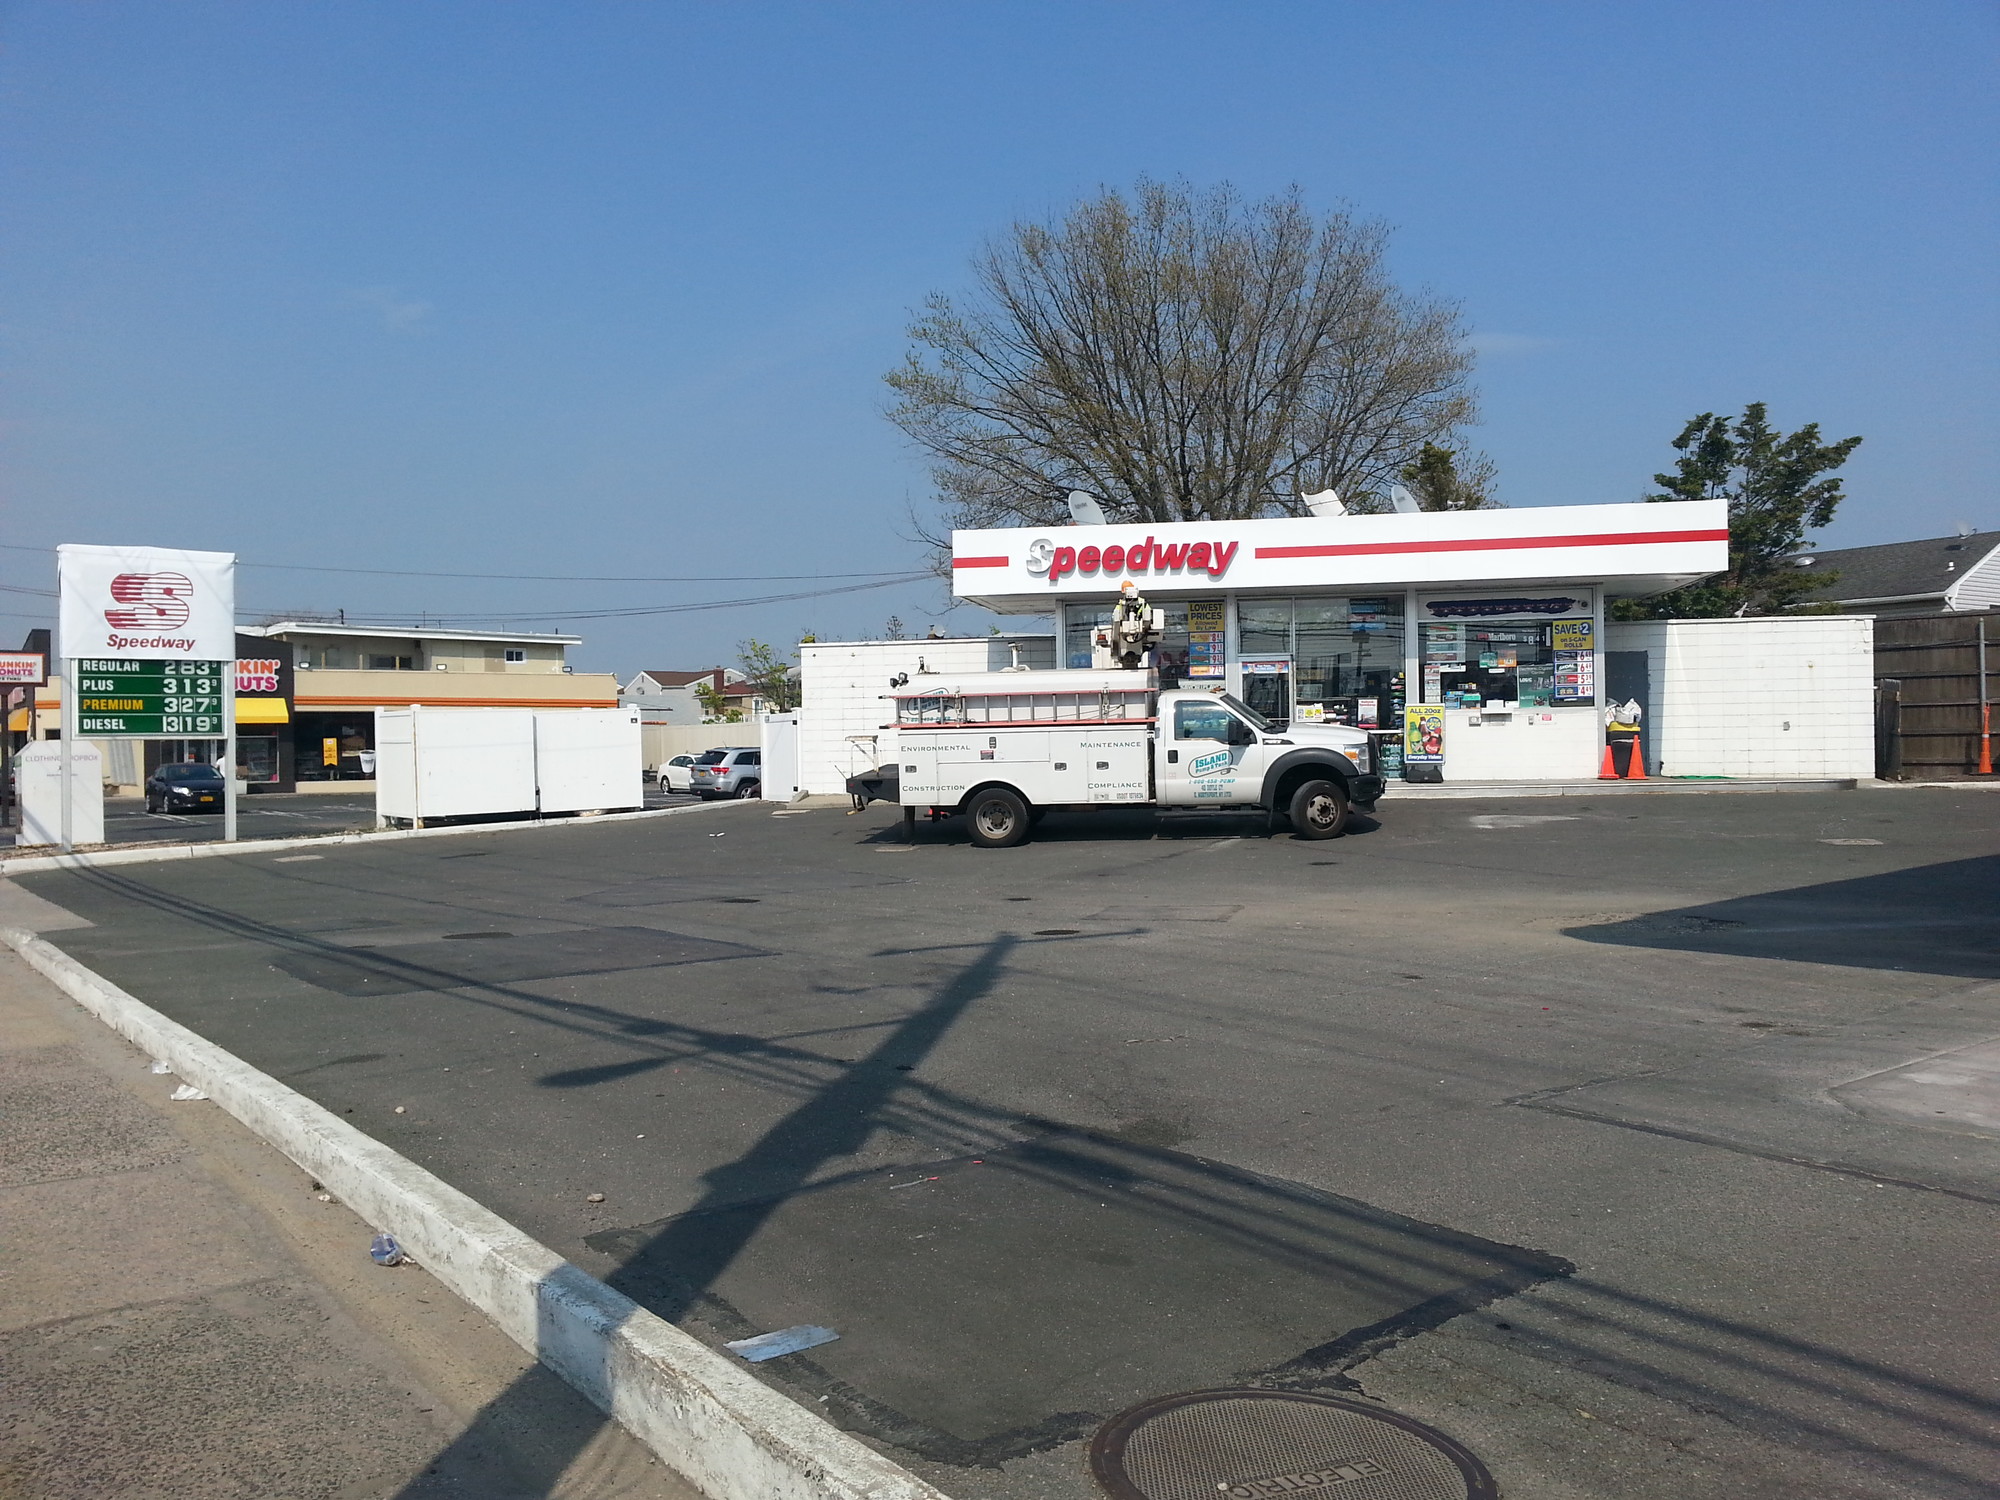 A Speedway moved into the old Hess location on Austin Blvd., Island Park